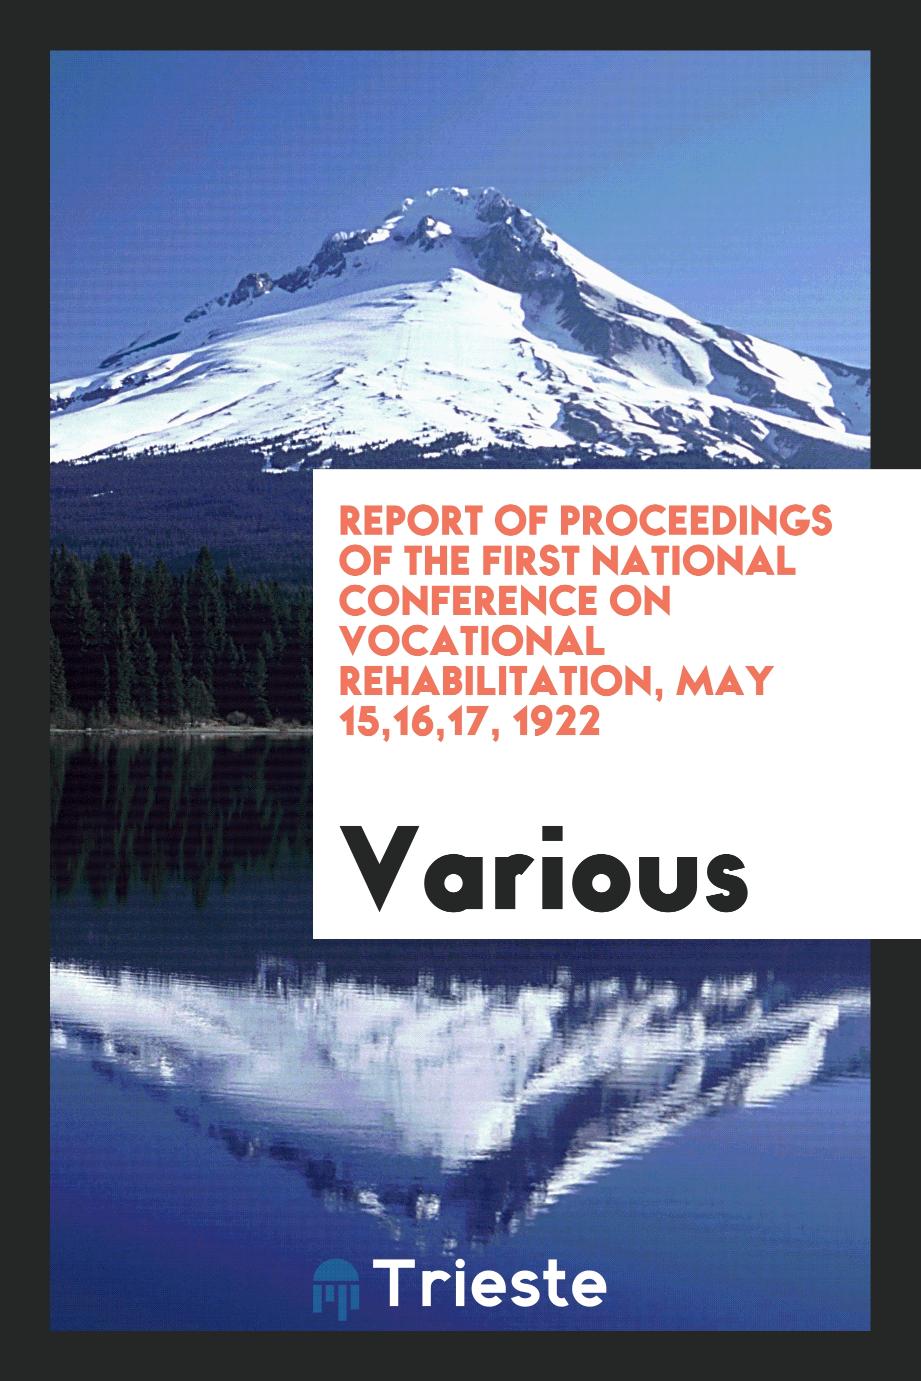 Report of Proceedings of the First National Conference on Vocational Rehabilitation, May 15,16,17, 1922